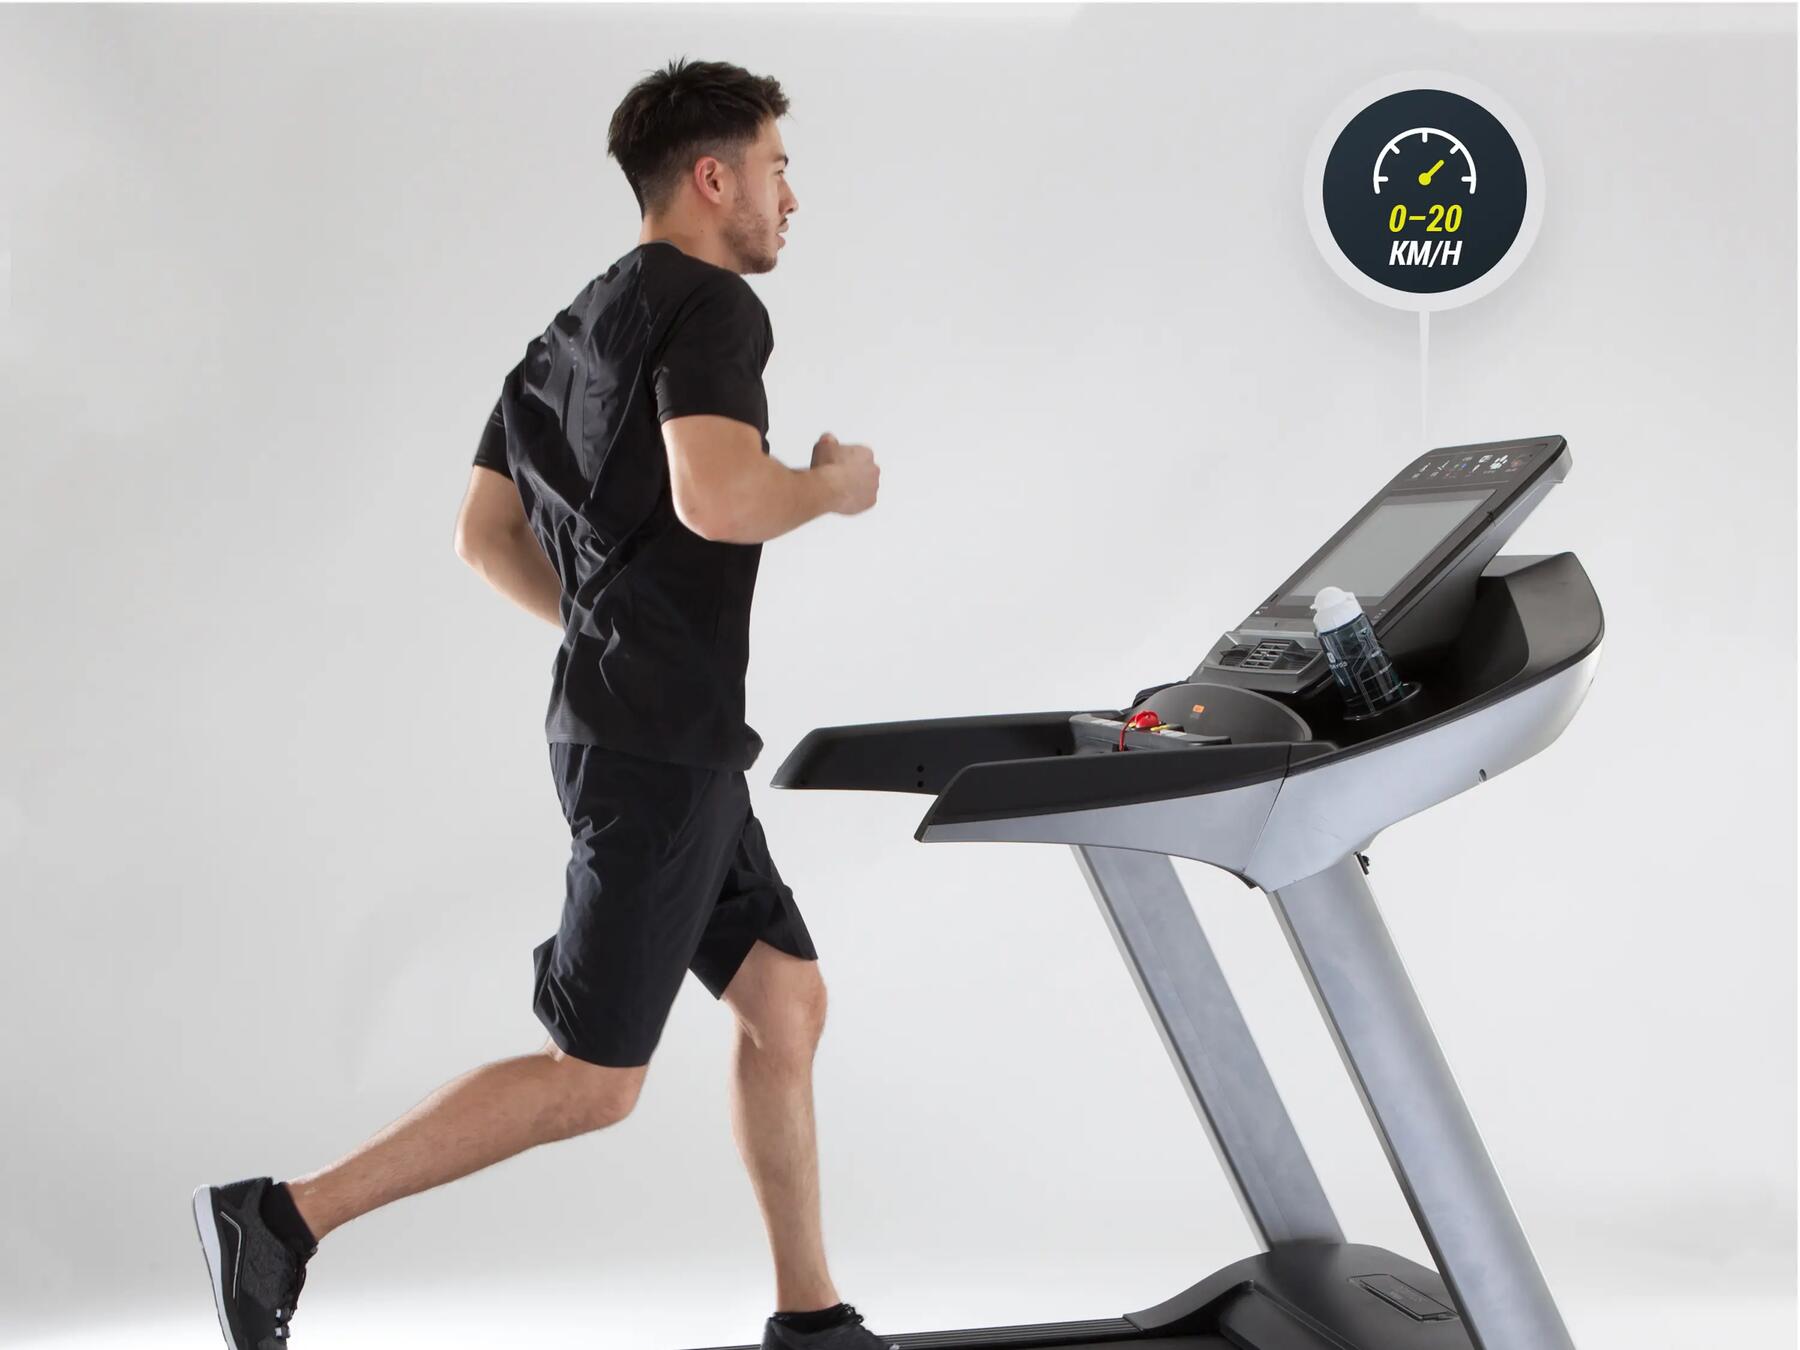 How to Choose a Home Treadmill